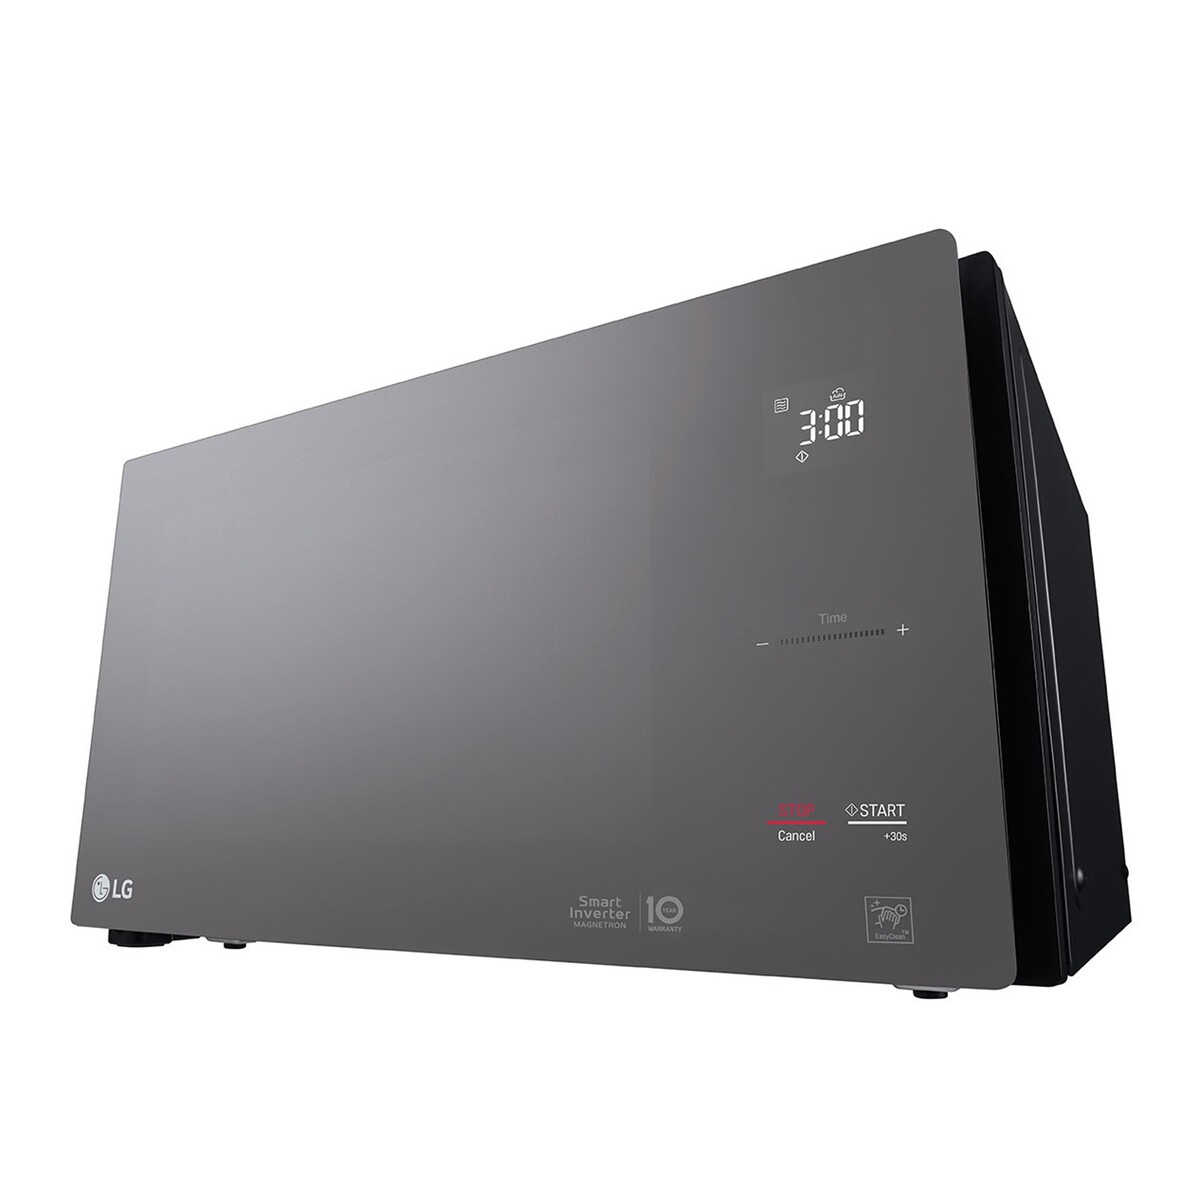 LG Inverter Solo Microwave Oven MS4295DIS 42 Litre